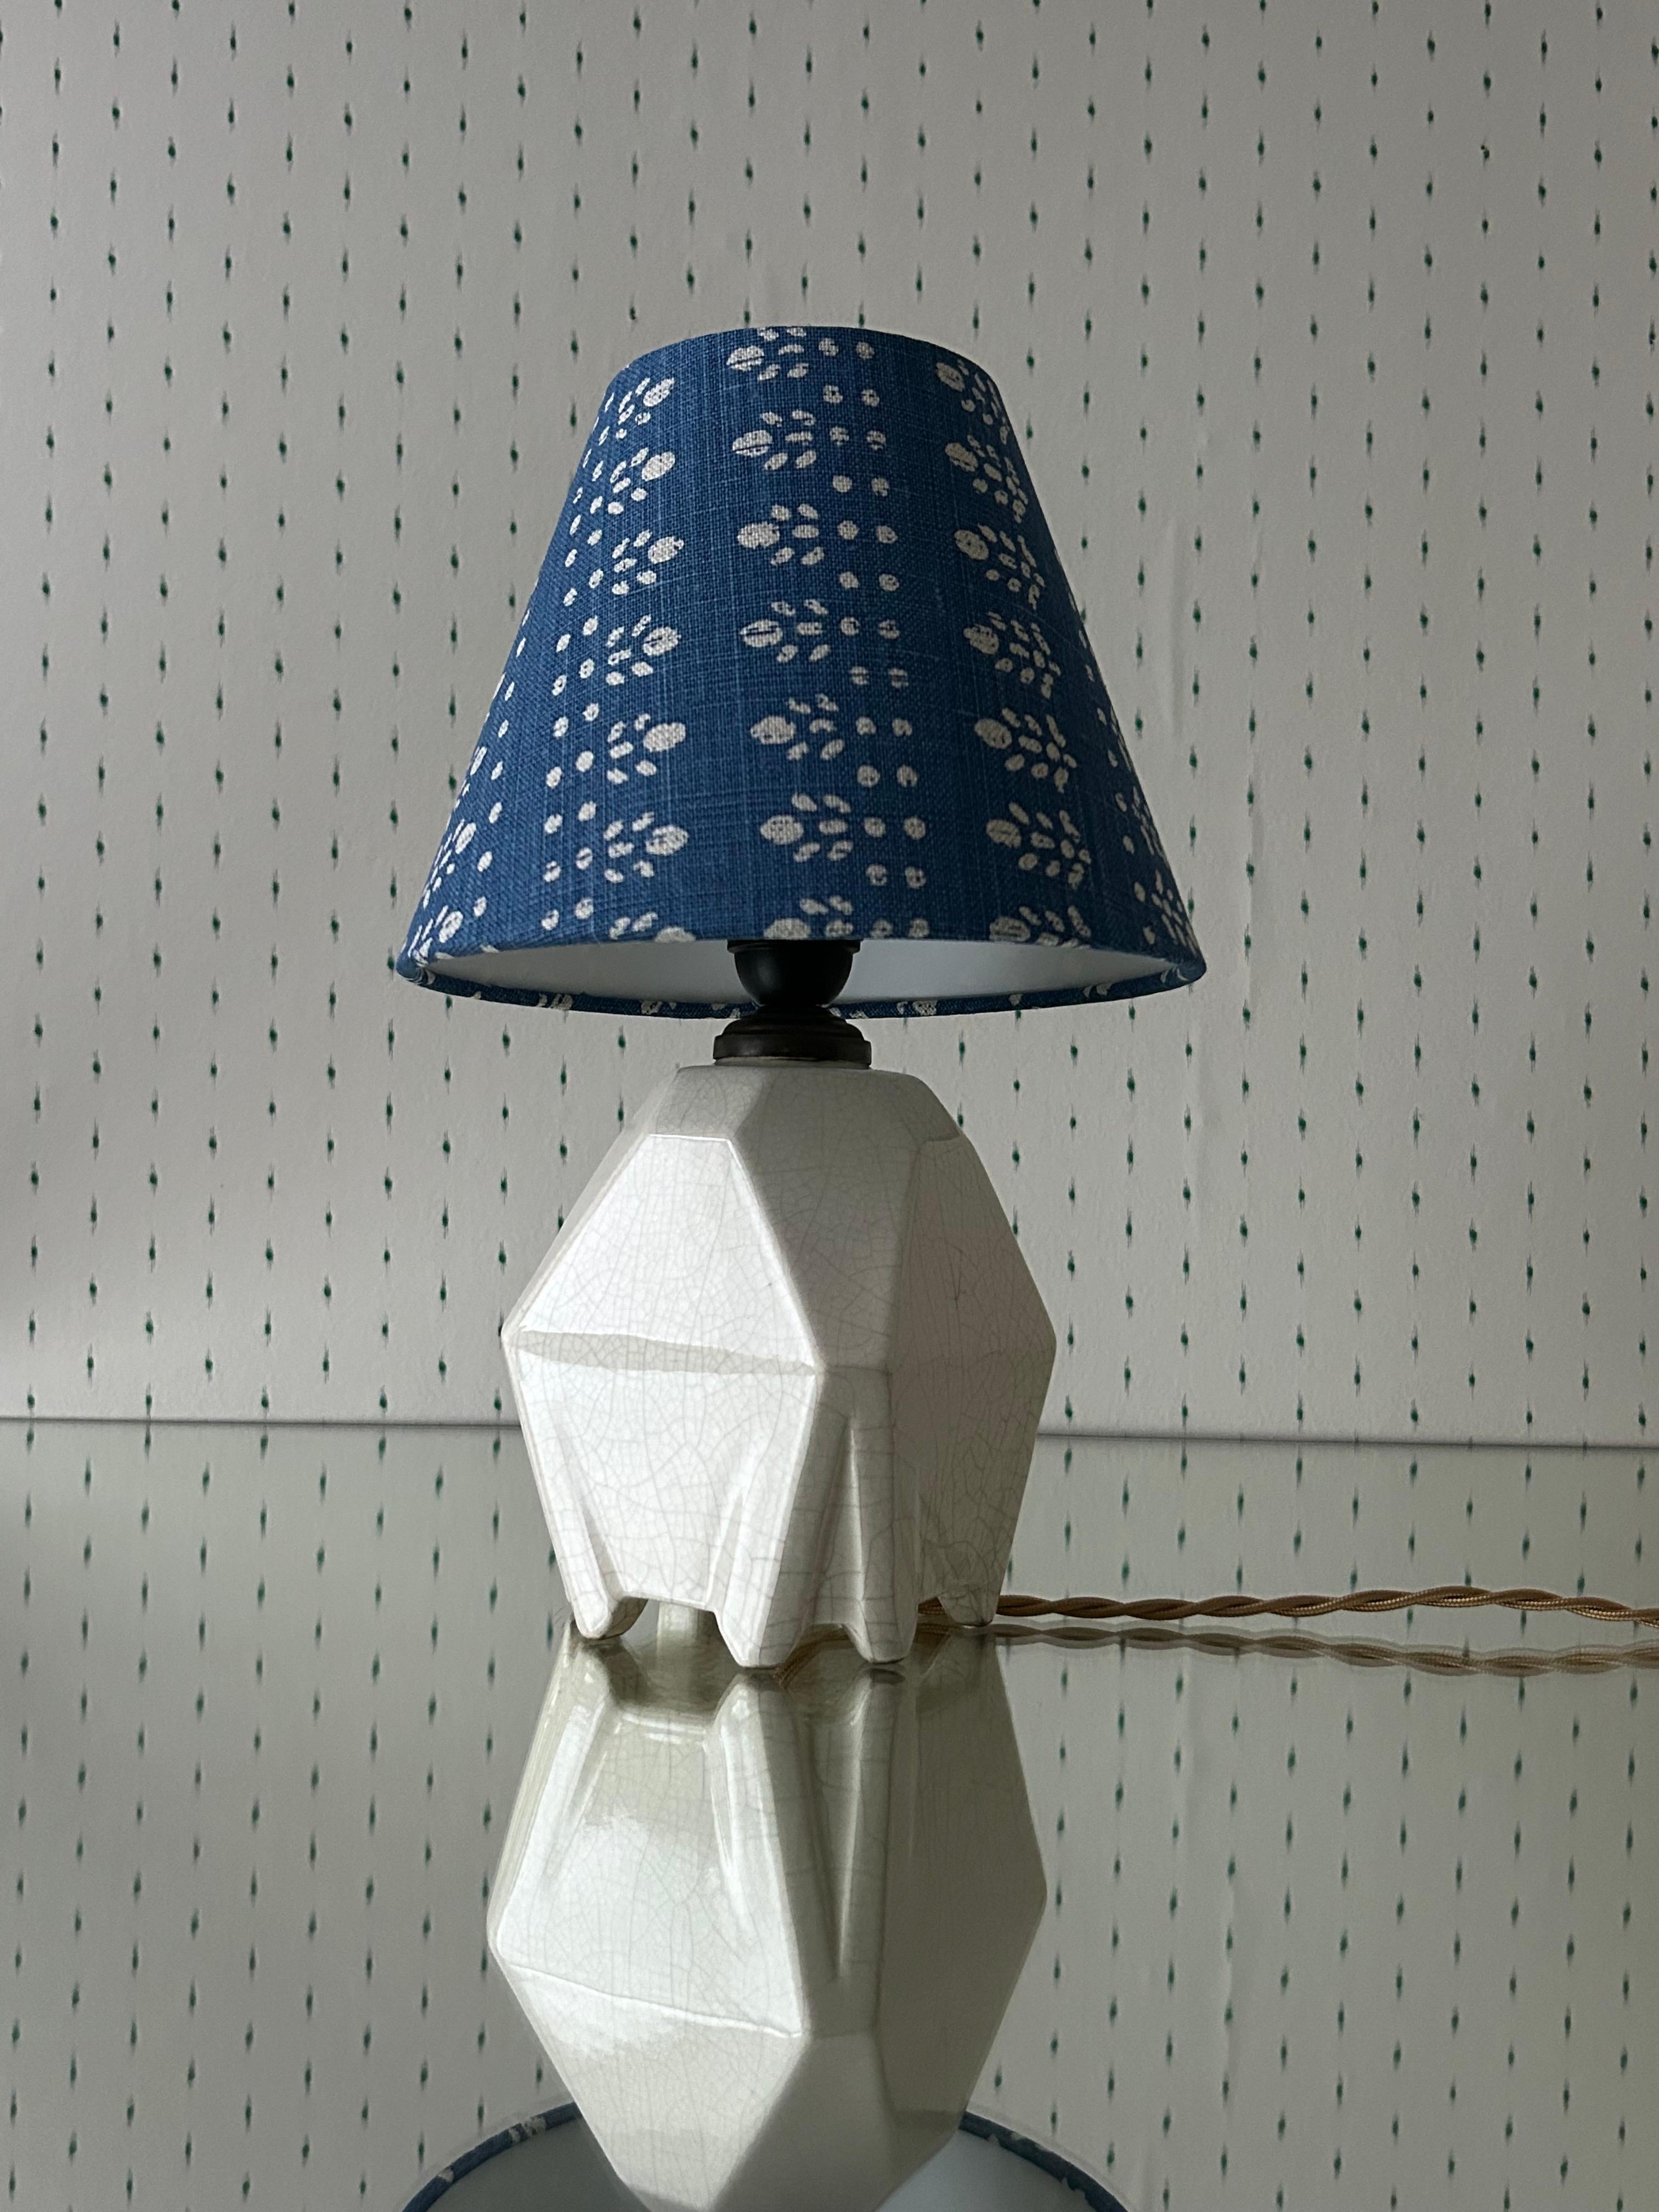 French Vintage Ceramic Table Lamp in White with Customized Blue Shade, France, 1920s For Sale